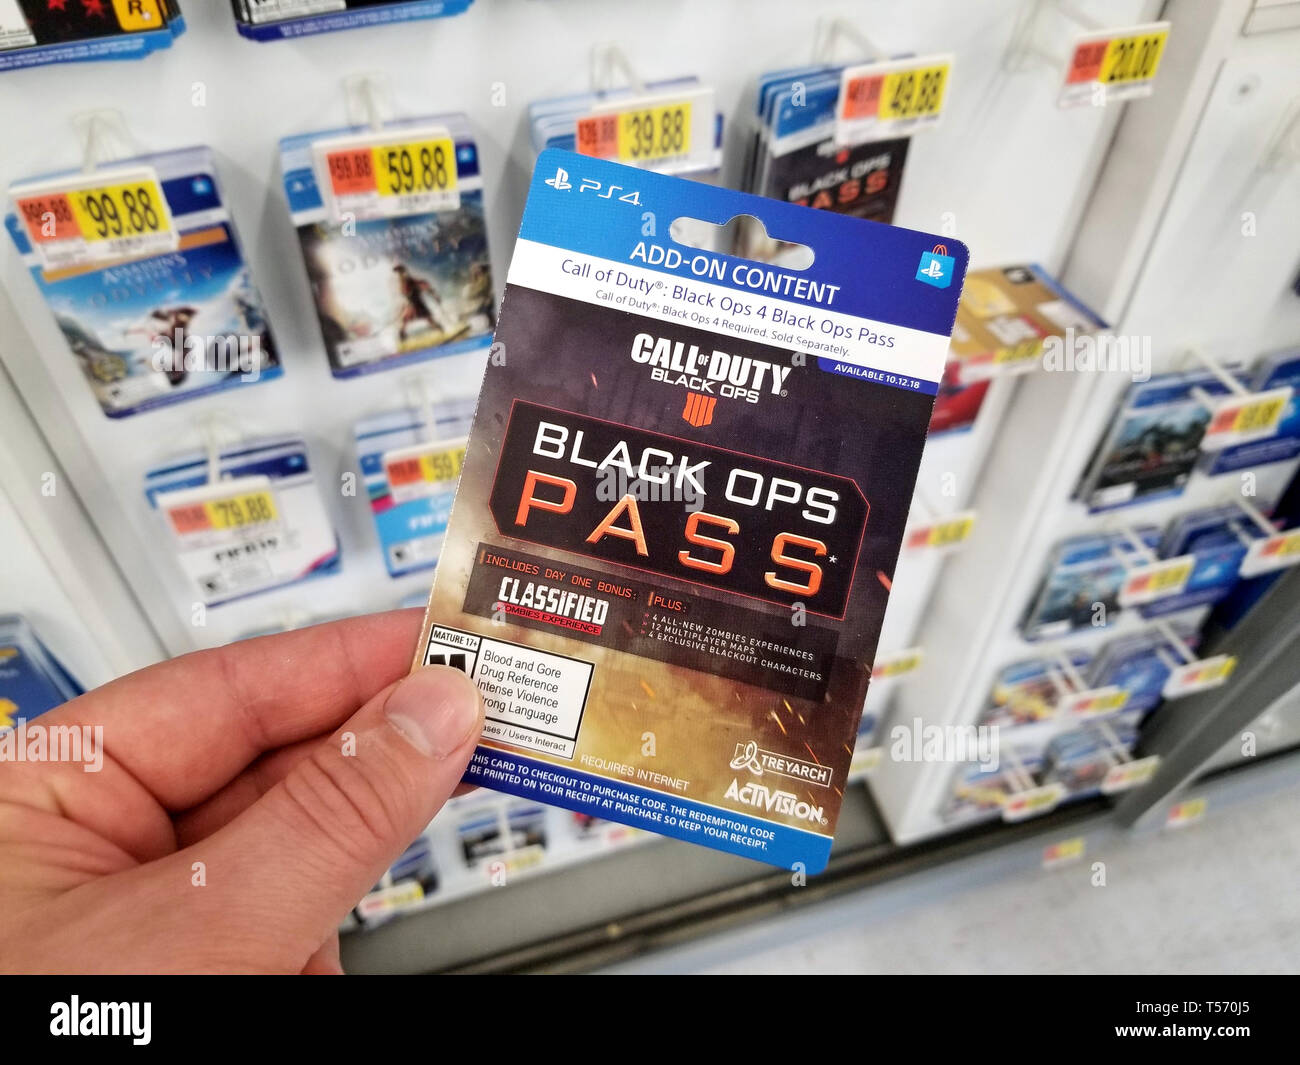 PLATTSBURGH, USA - JANUARY 21, 2019 : Call of Duty Black Ops video game Pass card for PS4 in a hand of a buyer at Walmart store. Stock Photo